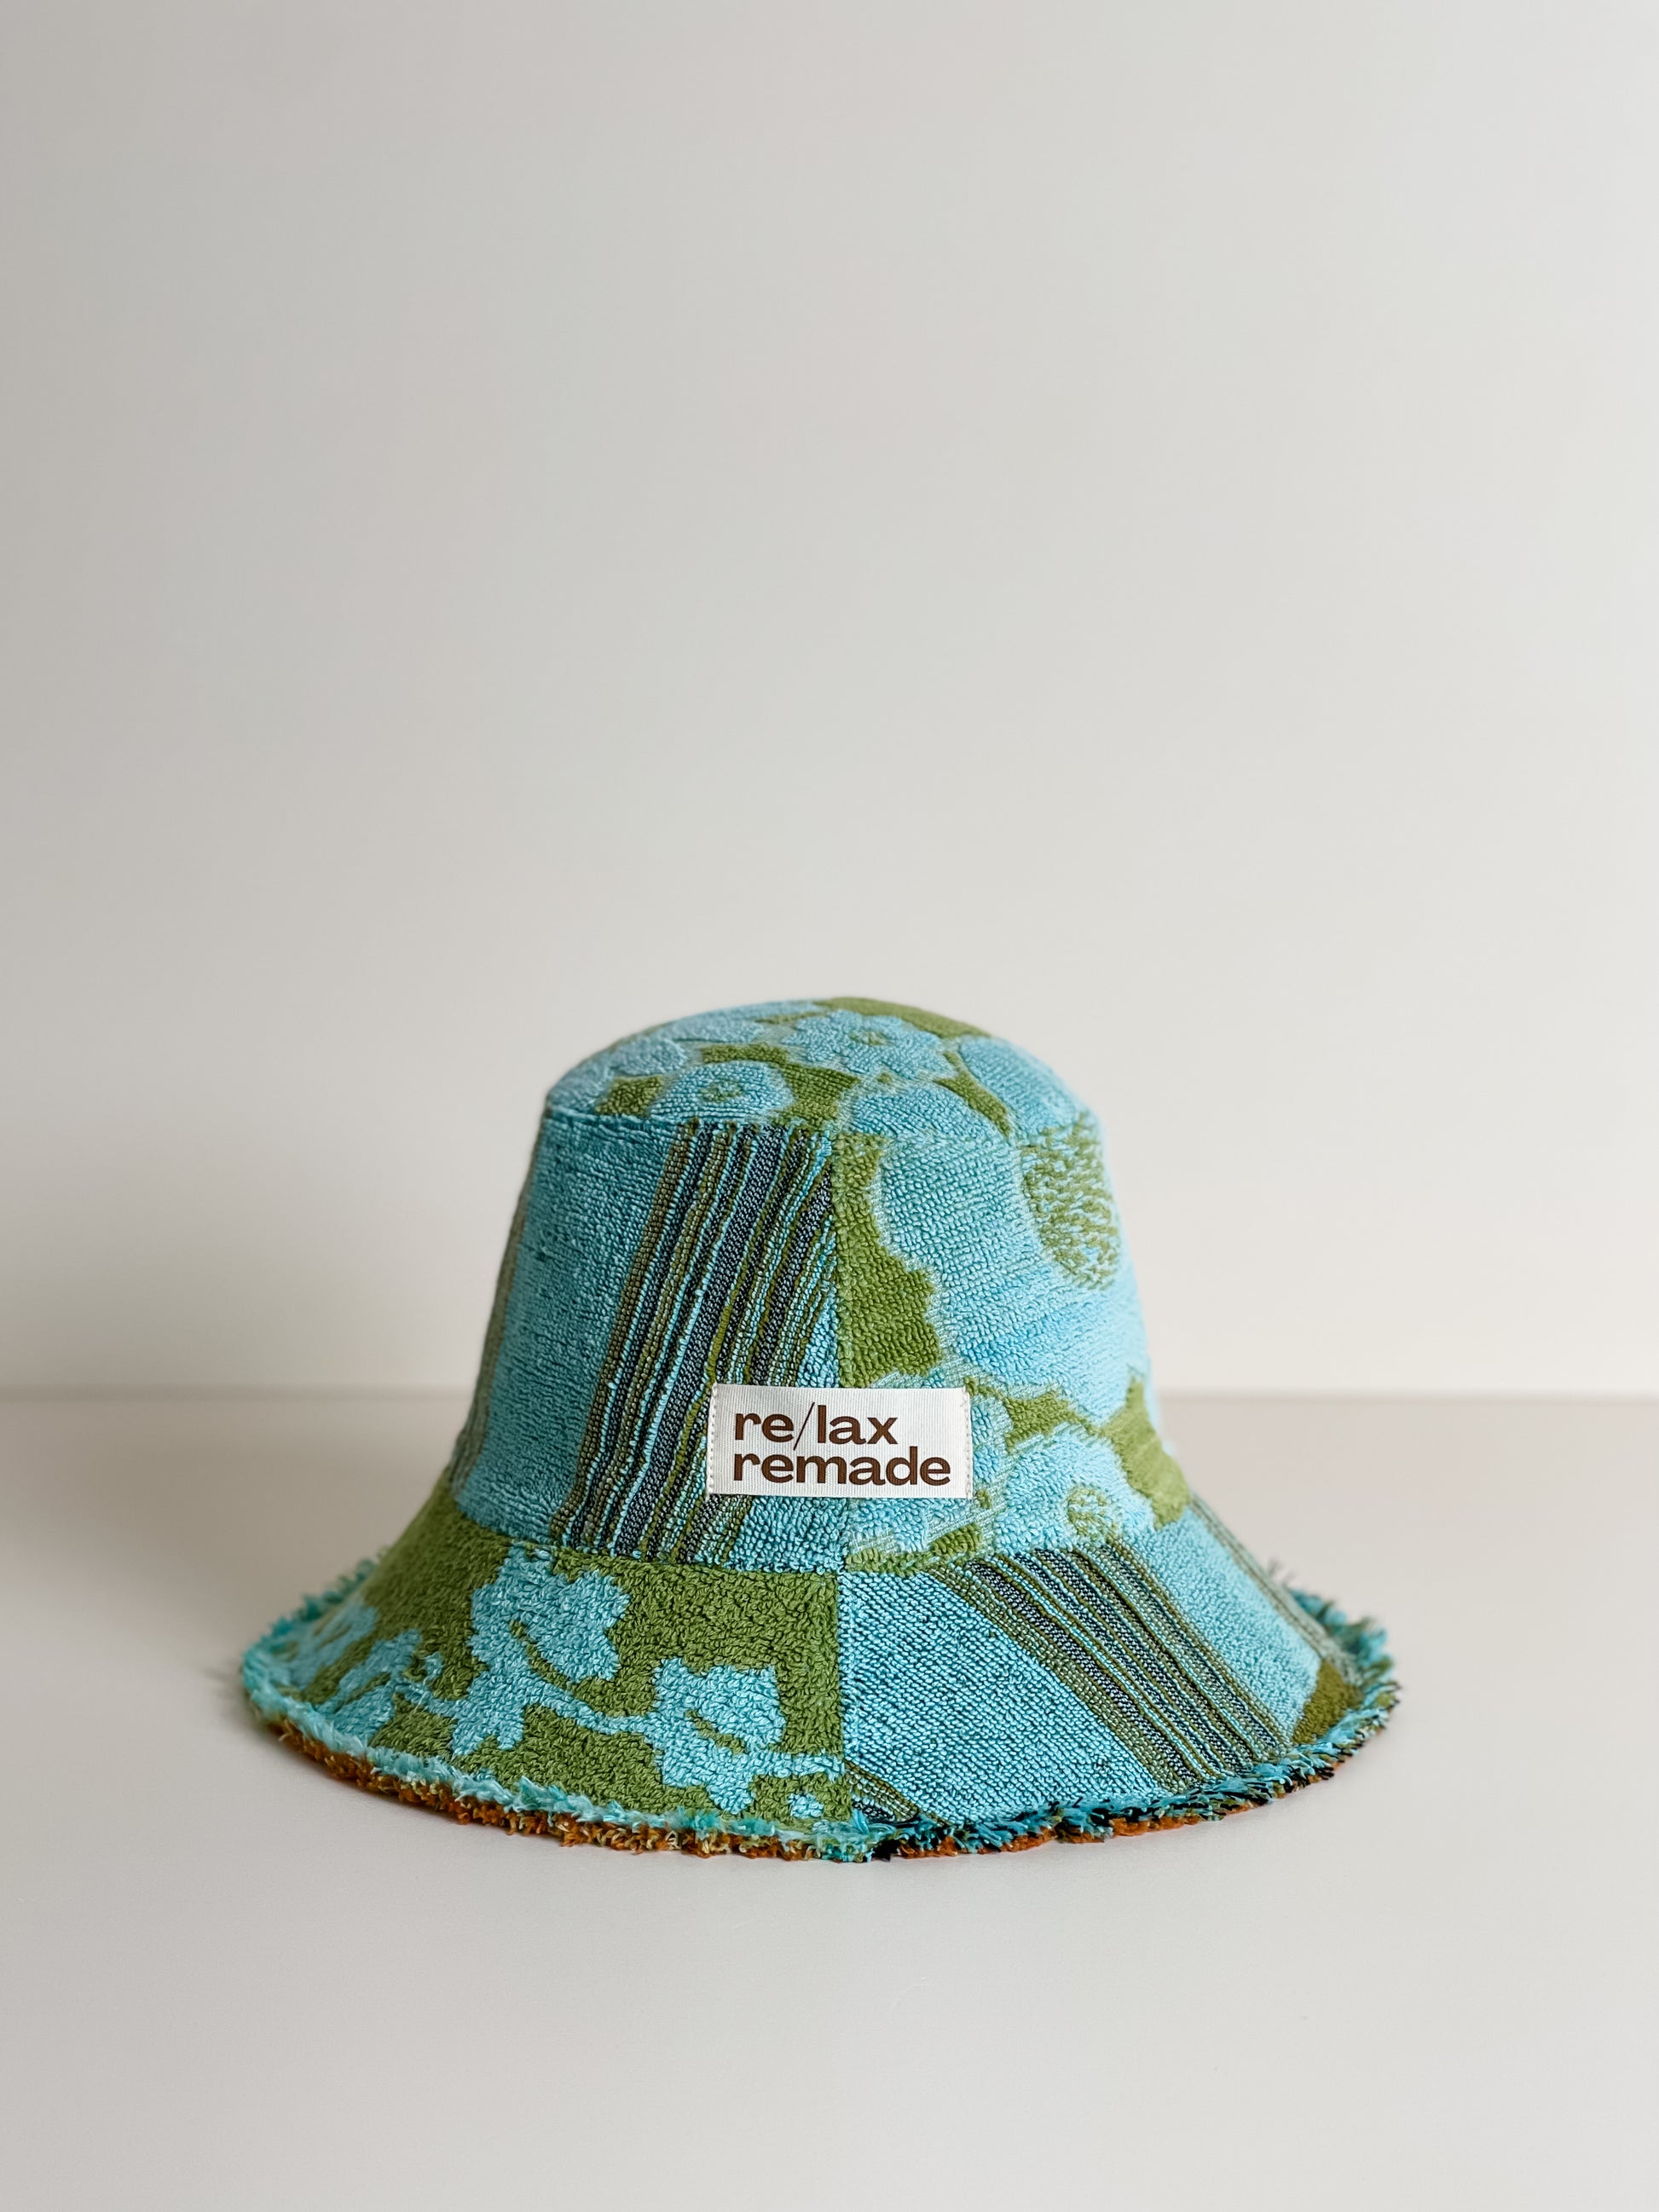 Re/lax Remade one-of-a-kind vintage towel hats, lovingly handmade in Australia from upcycled fabrics.